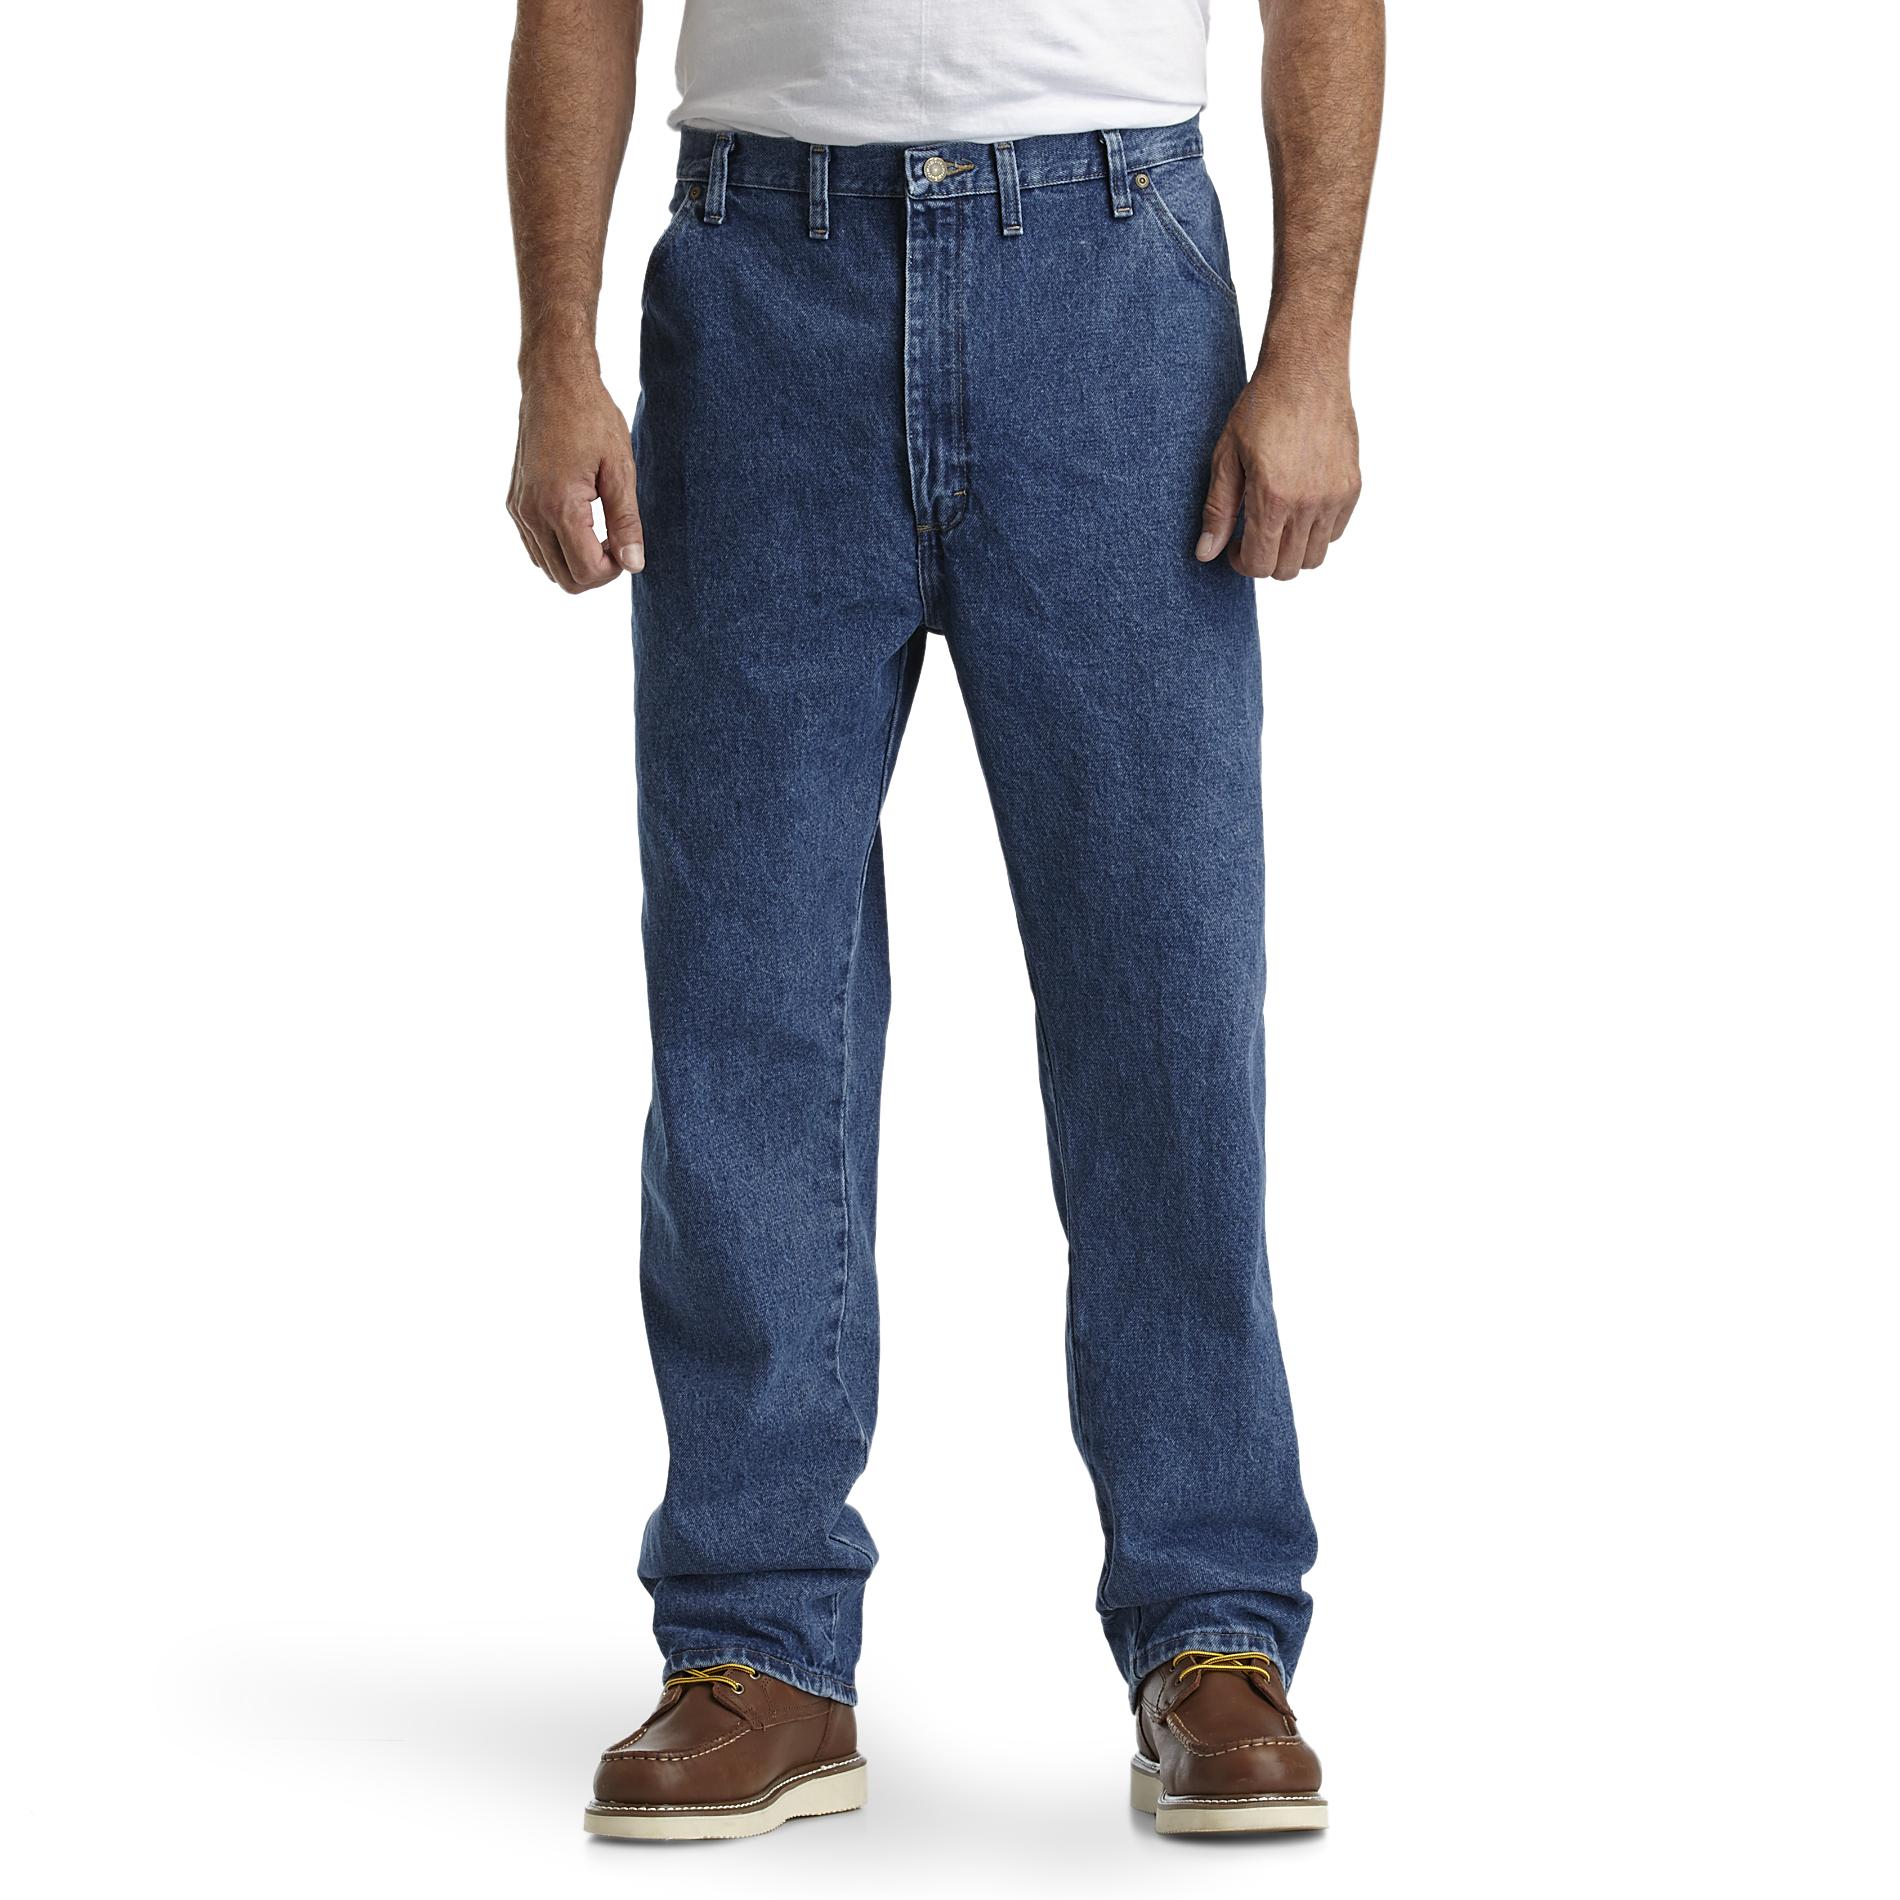 Men's Stonewashed Denim Relaxed Fit Jean